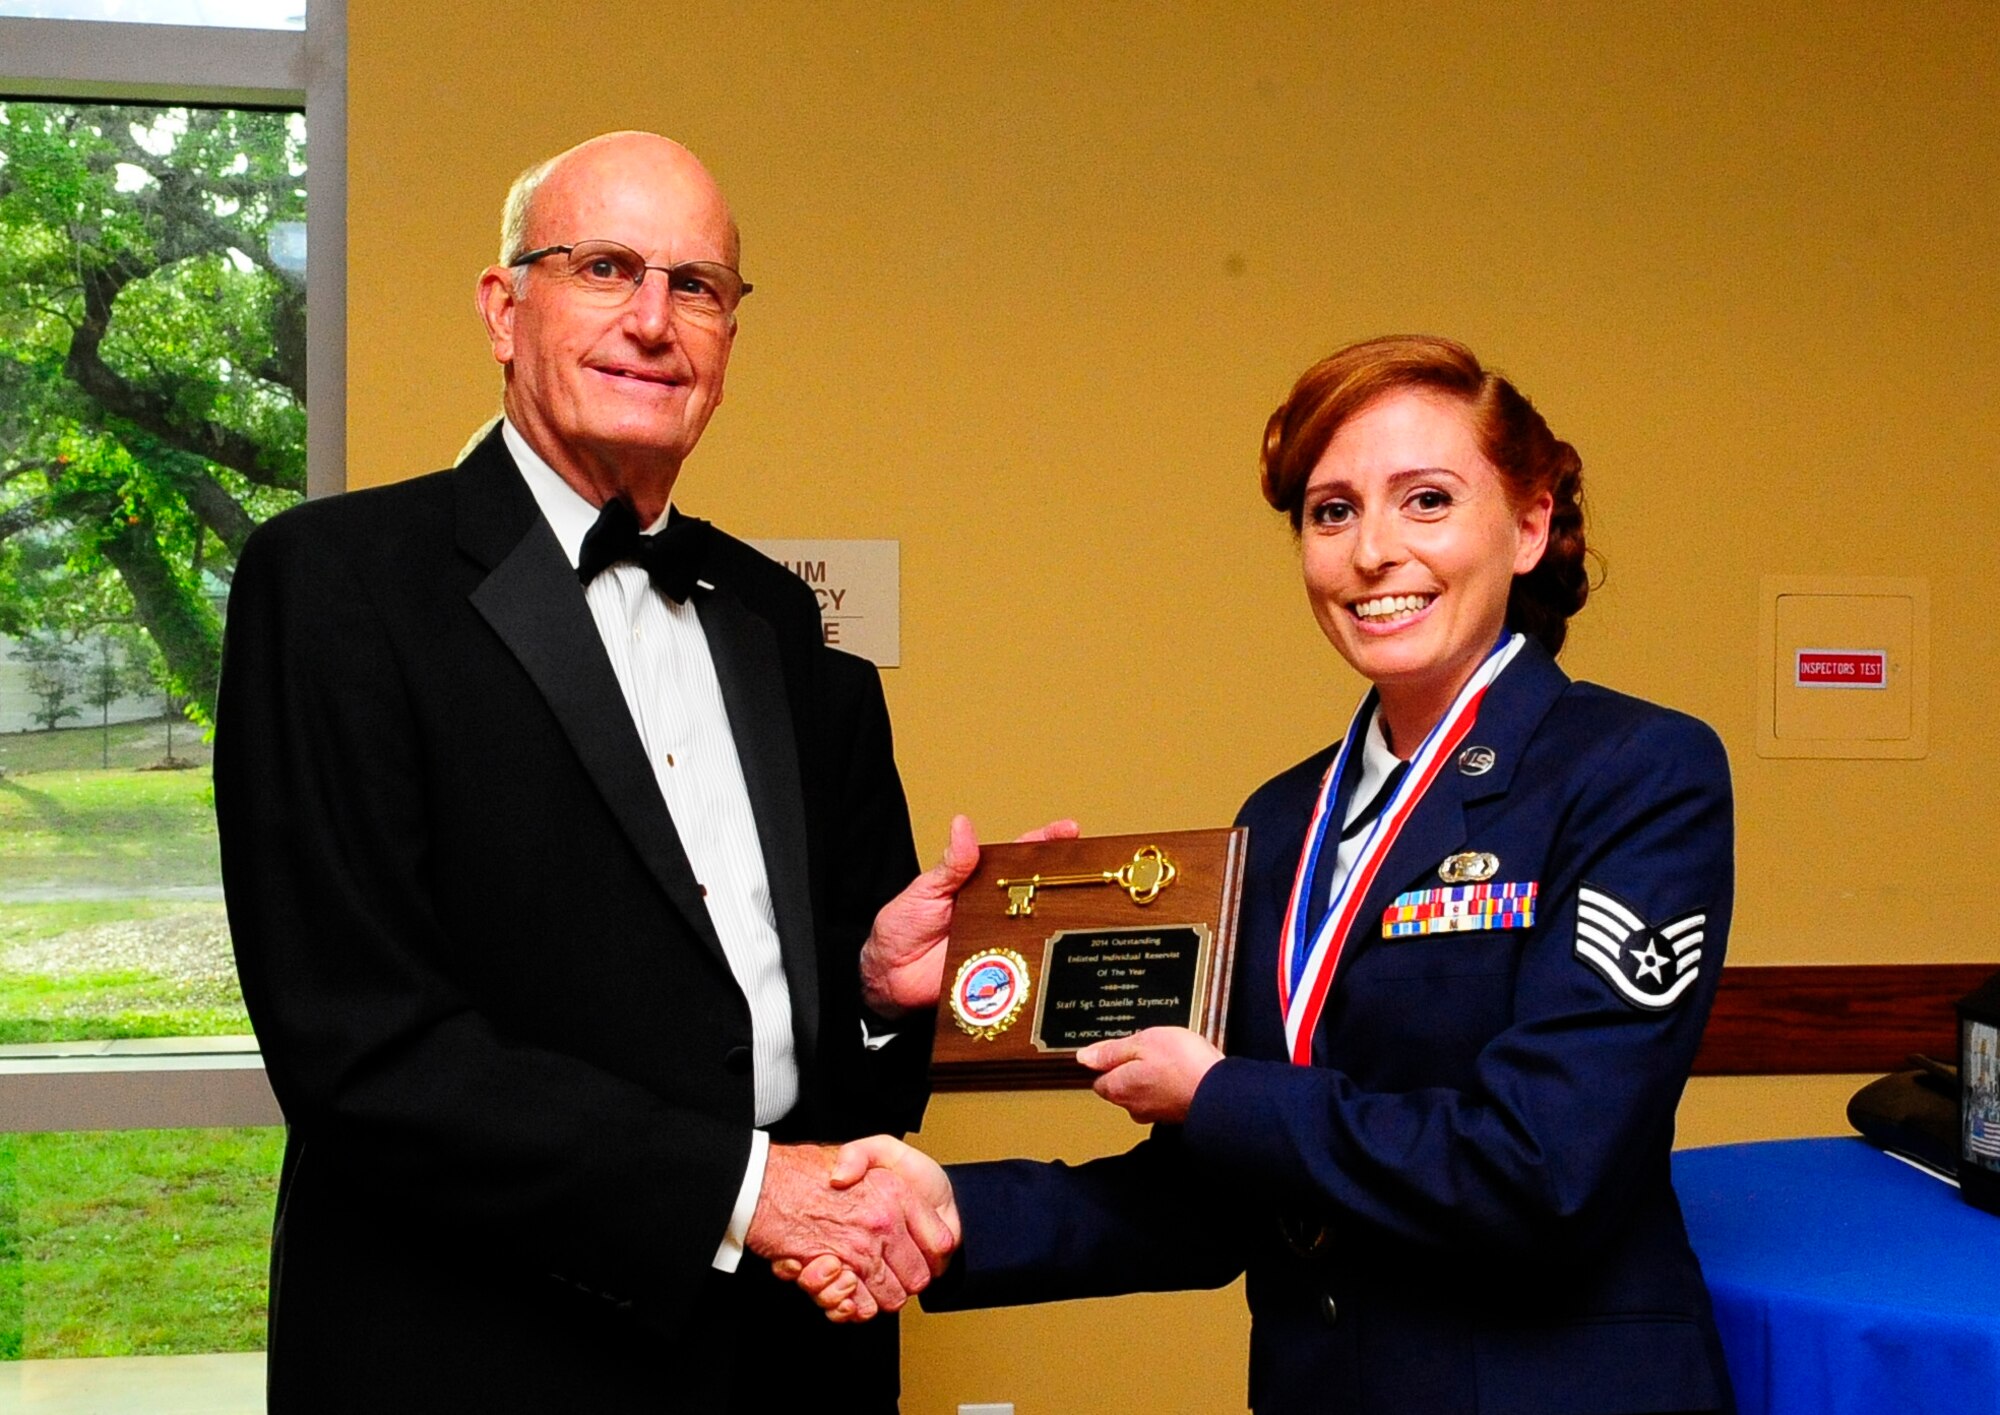 Mayor Mike Anderson, Mayor of Ft Walton Beach, presents a key to the city to Staff Sgt. Danielle Szymcyk, Air Force Special Operations Command's individual reservist of the year (enlisted), during a medallion ceremony held prior to the banquet May 14.  More than 340 Air Commandos celebrated the 2014 Outstanding Airmen and Civilians of the year and honored 25 years of command heritage at the Hurlburt Field Soundside Club.